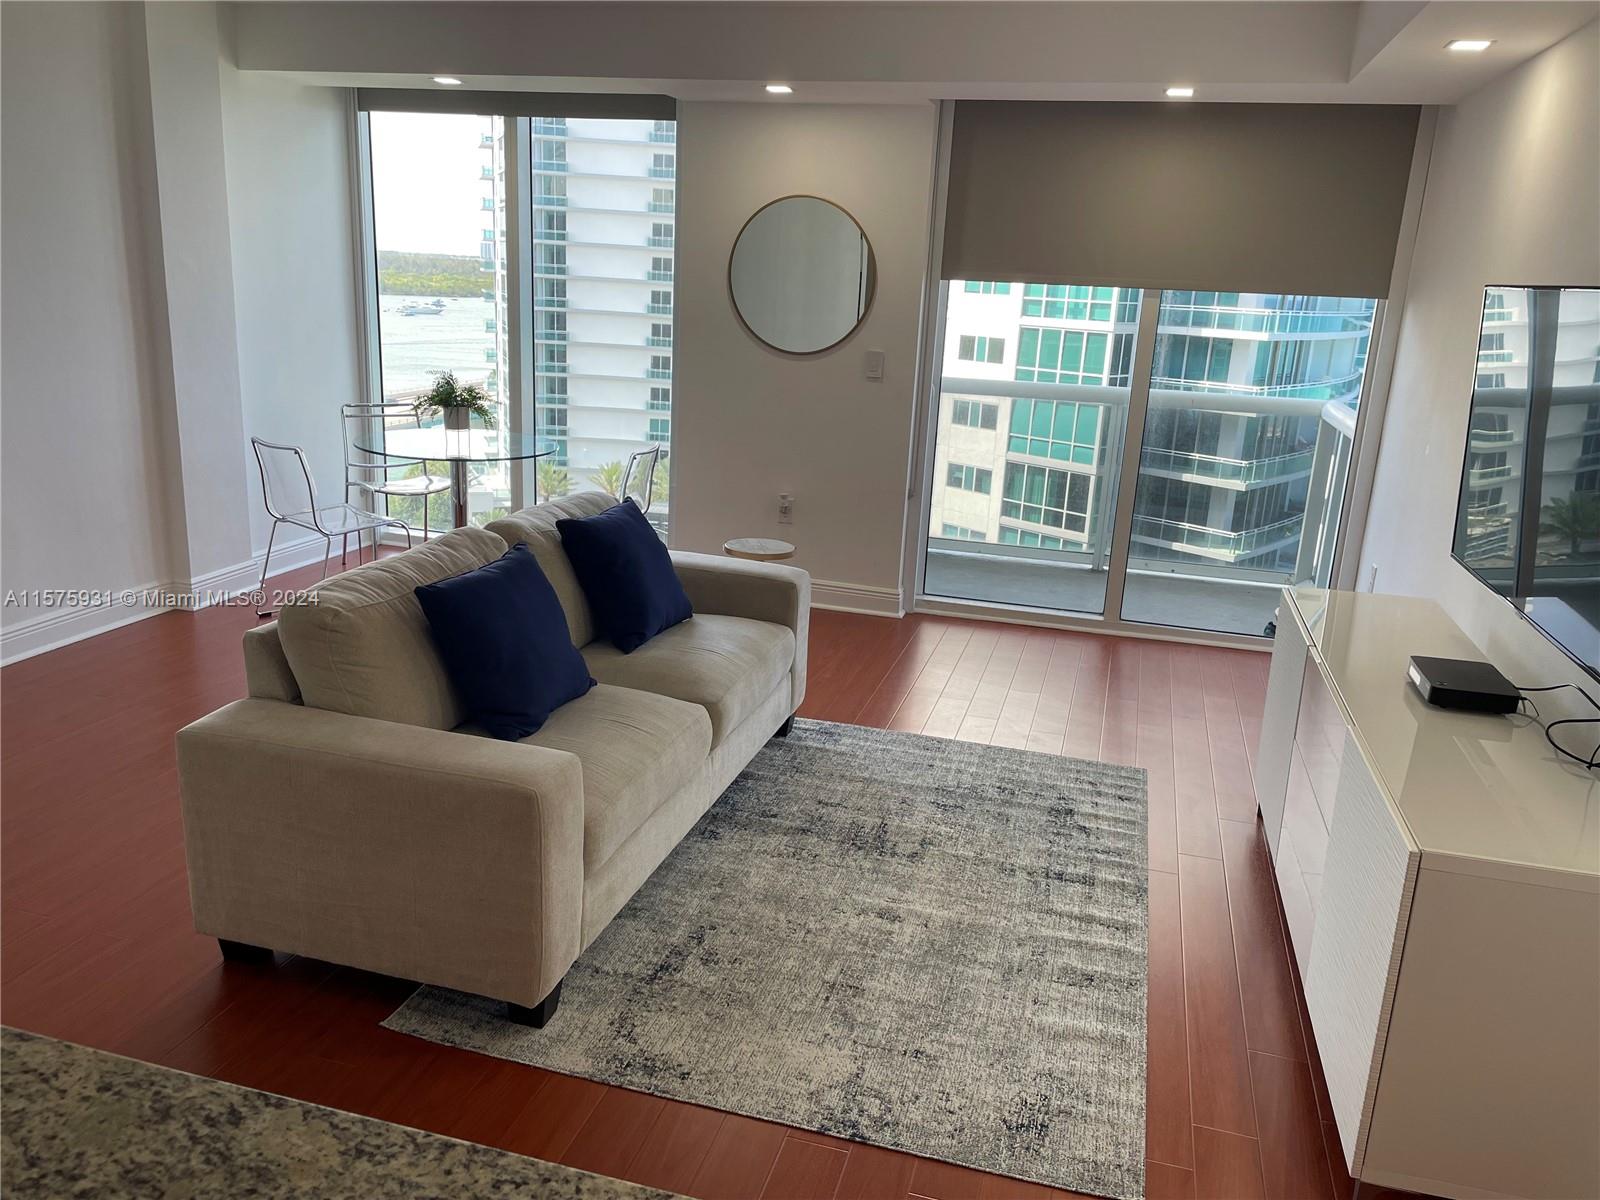 This 12th Floor Studio is a 5 Line  with best views of Ocean and Intercoastal. Located in Designer Renovated Harbour House,next to the Bal Harbour Ritz Carlton.  Walk to all of Bal Harbour and Surfside Shopping. Building has on site restaurant with door to door delivery and Beach Service for a Hotel feel without the high maintenance fees of Hotel/Condo buildings.  Washer/Dryer in the unit. It is available immediately.  Call Listing Agent today for showing.